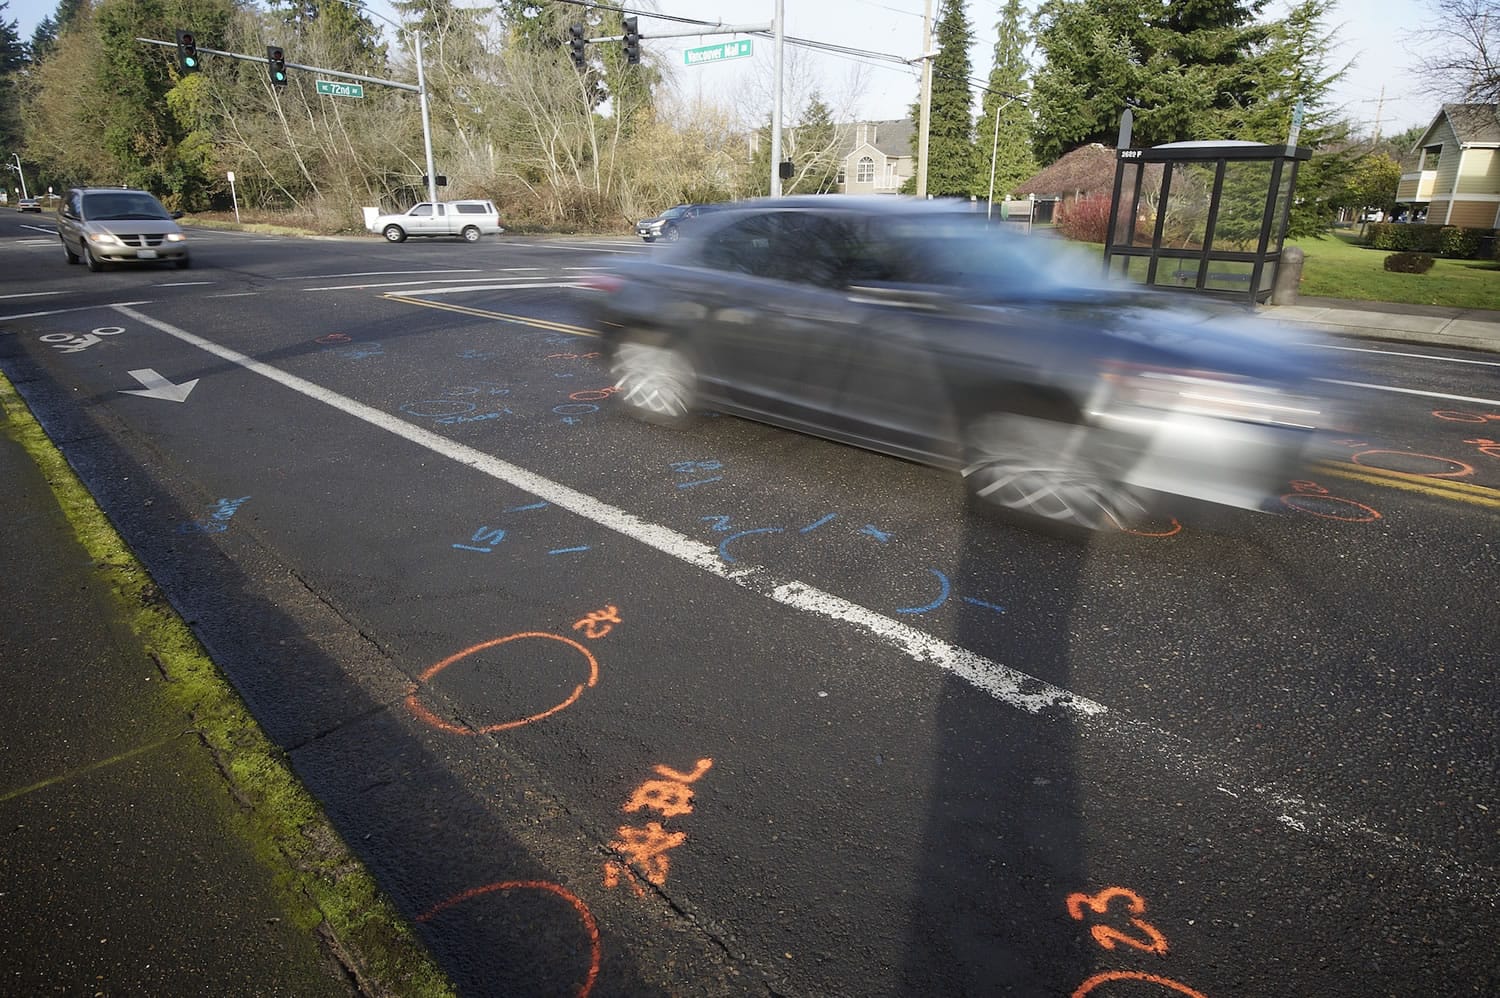 Motorists drive over police markings at the intersection of Northeast 72nd Avenue and Vancouver Mall Drive, where two people were struck and killed by a hit-and-run driver Sunday evening.